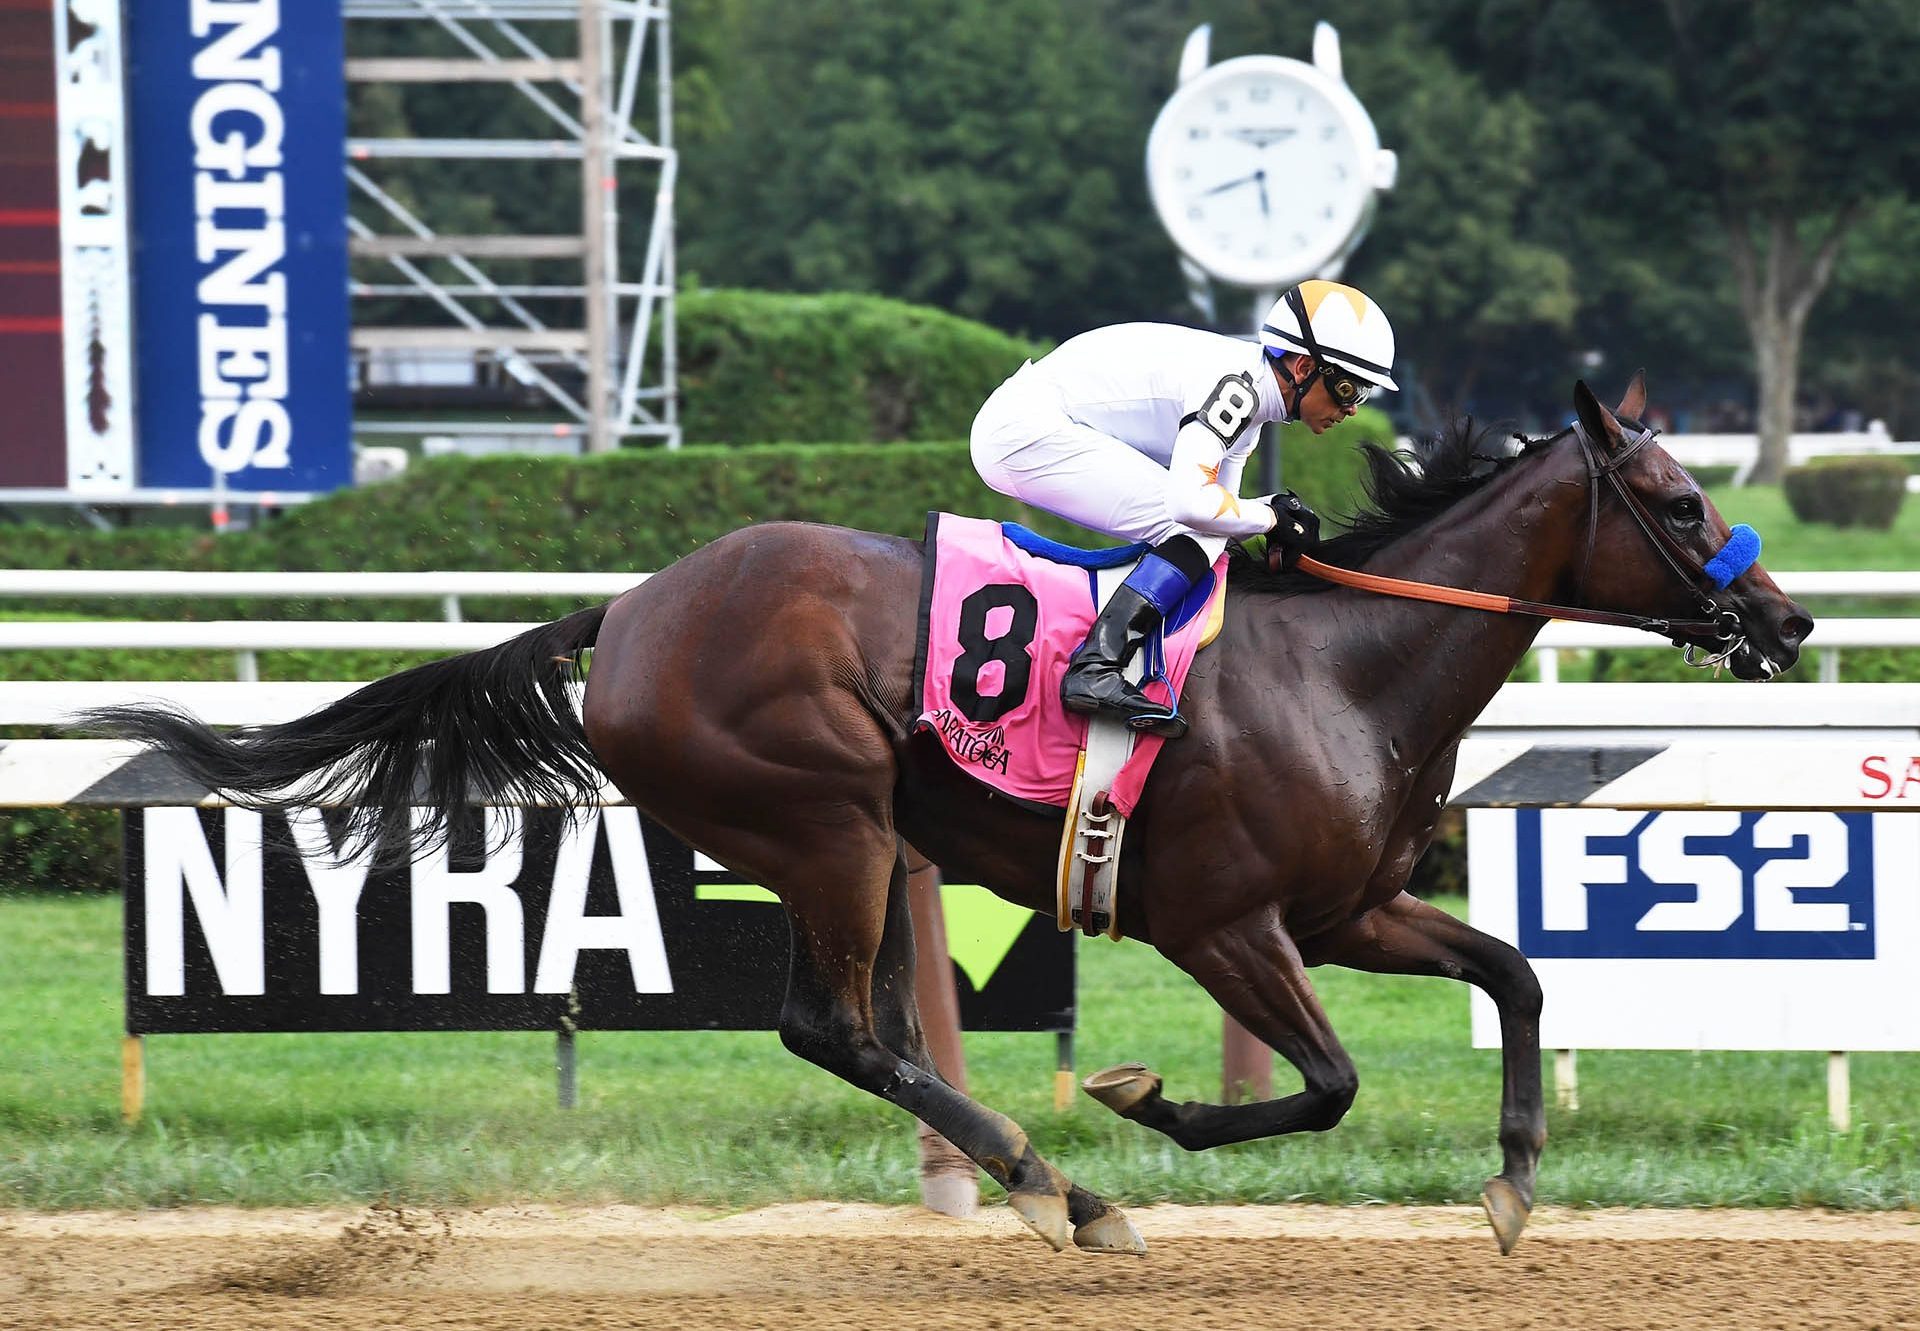 Dream Tree (Uncle Mo) winning the G2 Prioress at Saratoga